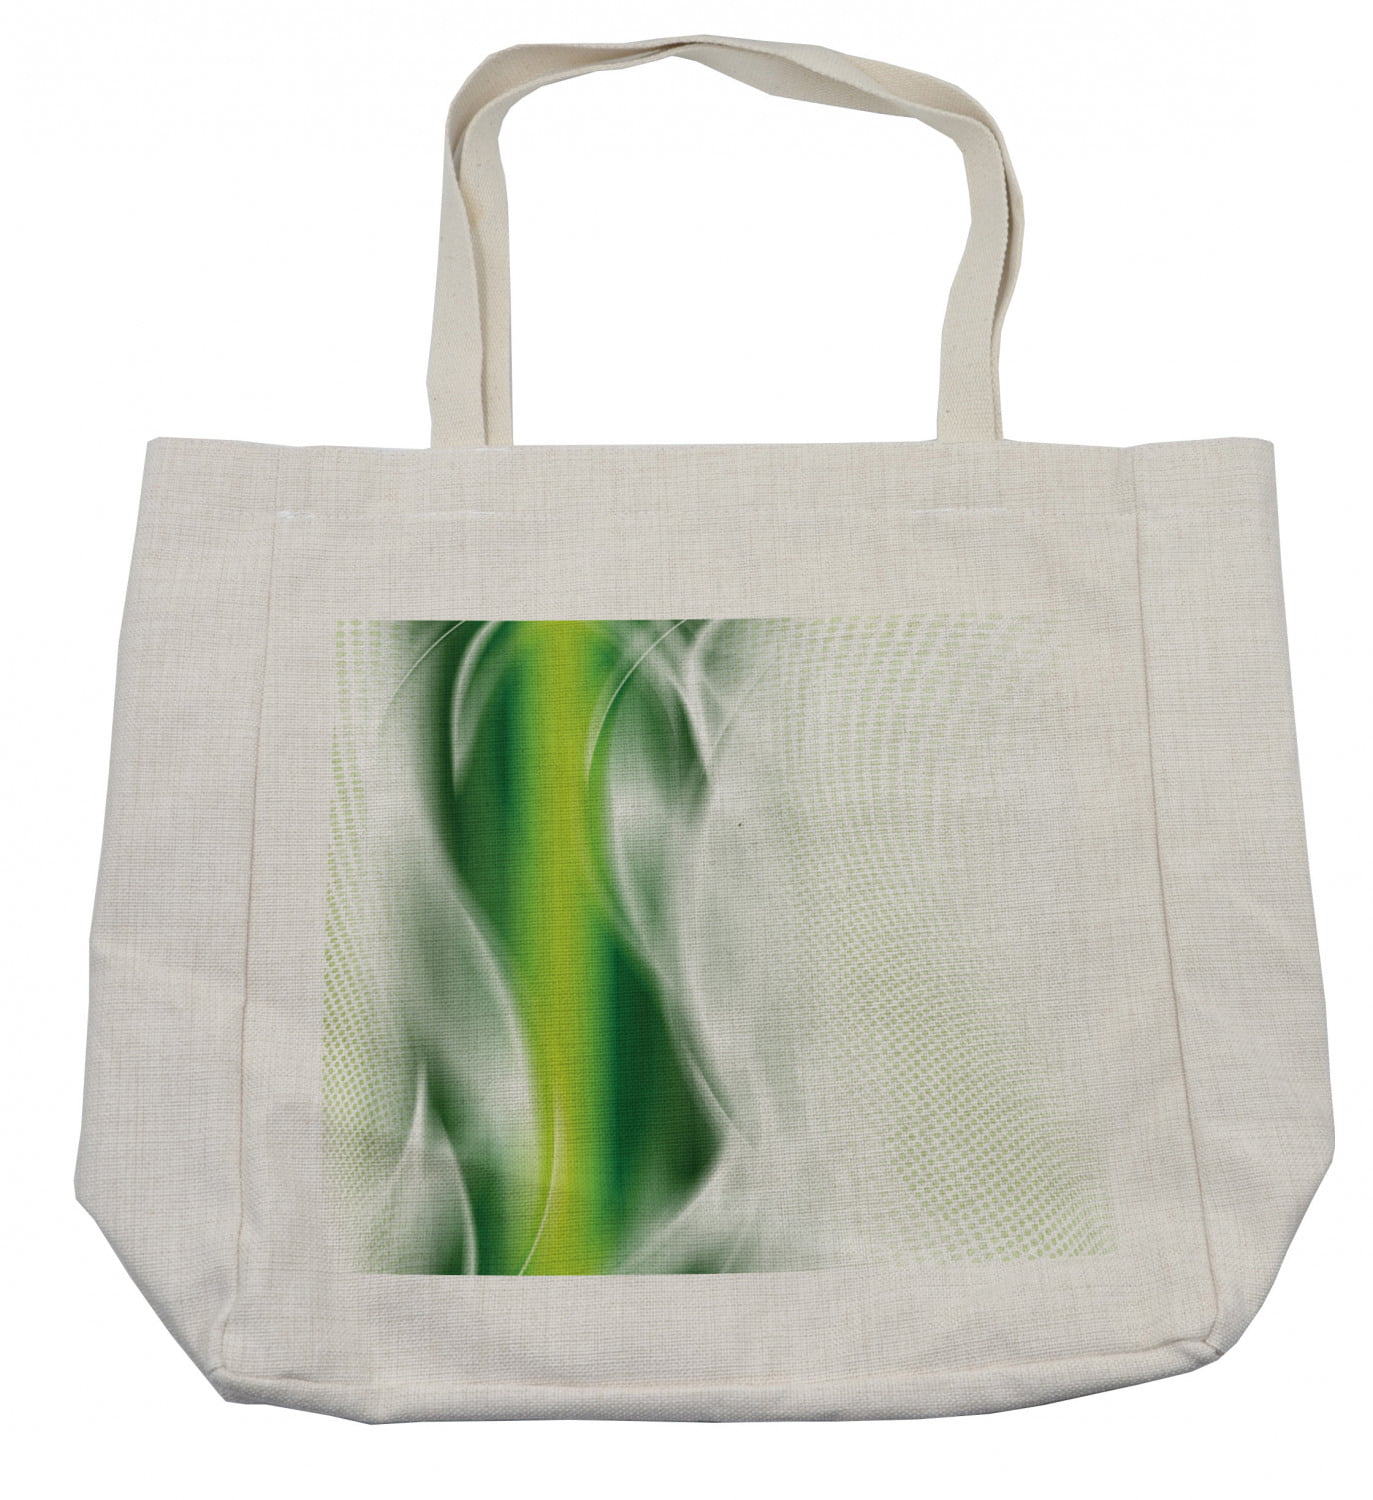 6 Pack Reusable Shopping Bag Recycled Eco Friendly Gift Tote Bags Gusset/10"x13" 